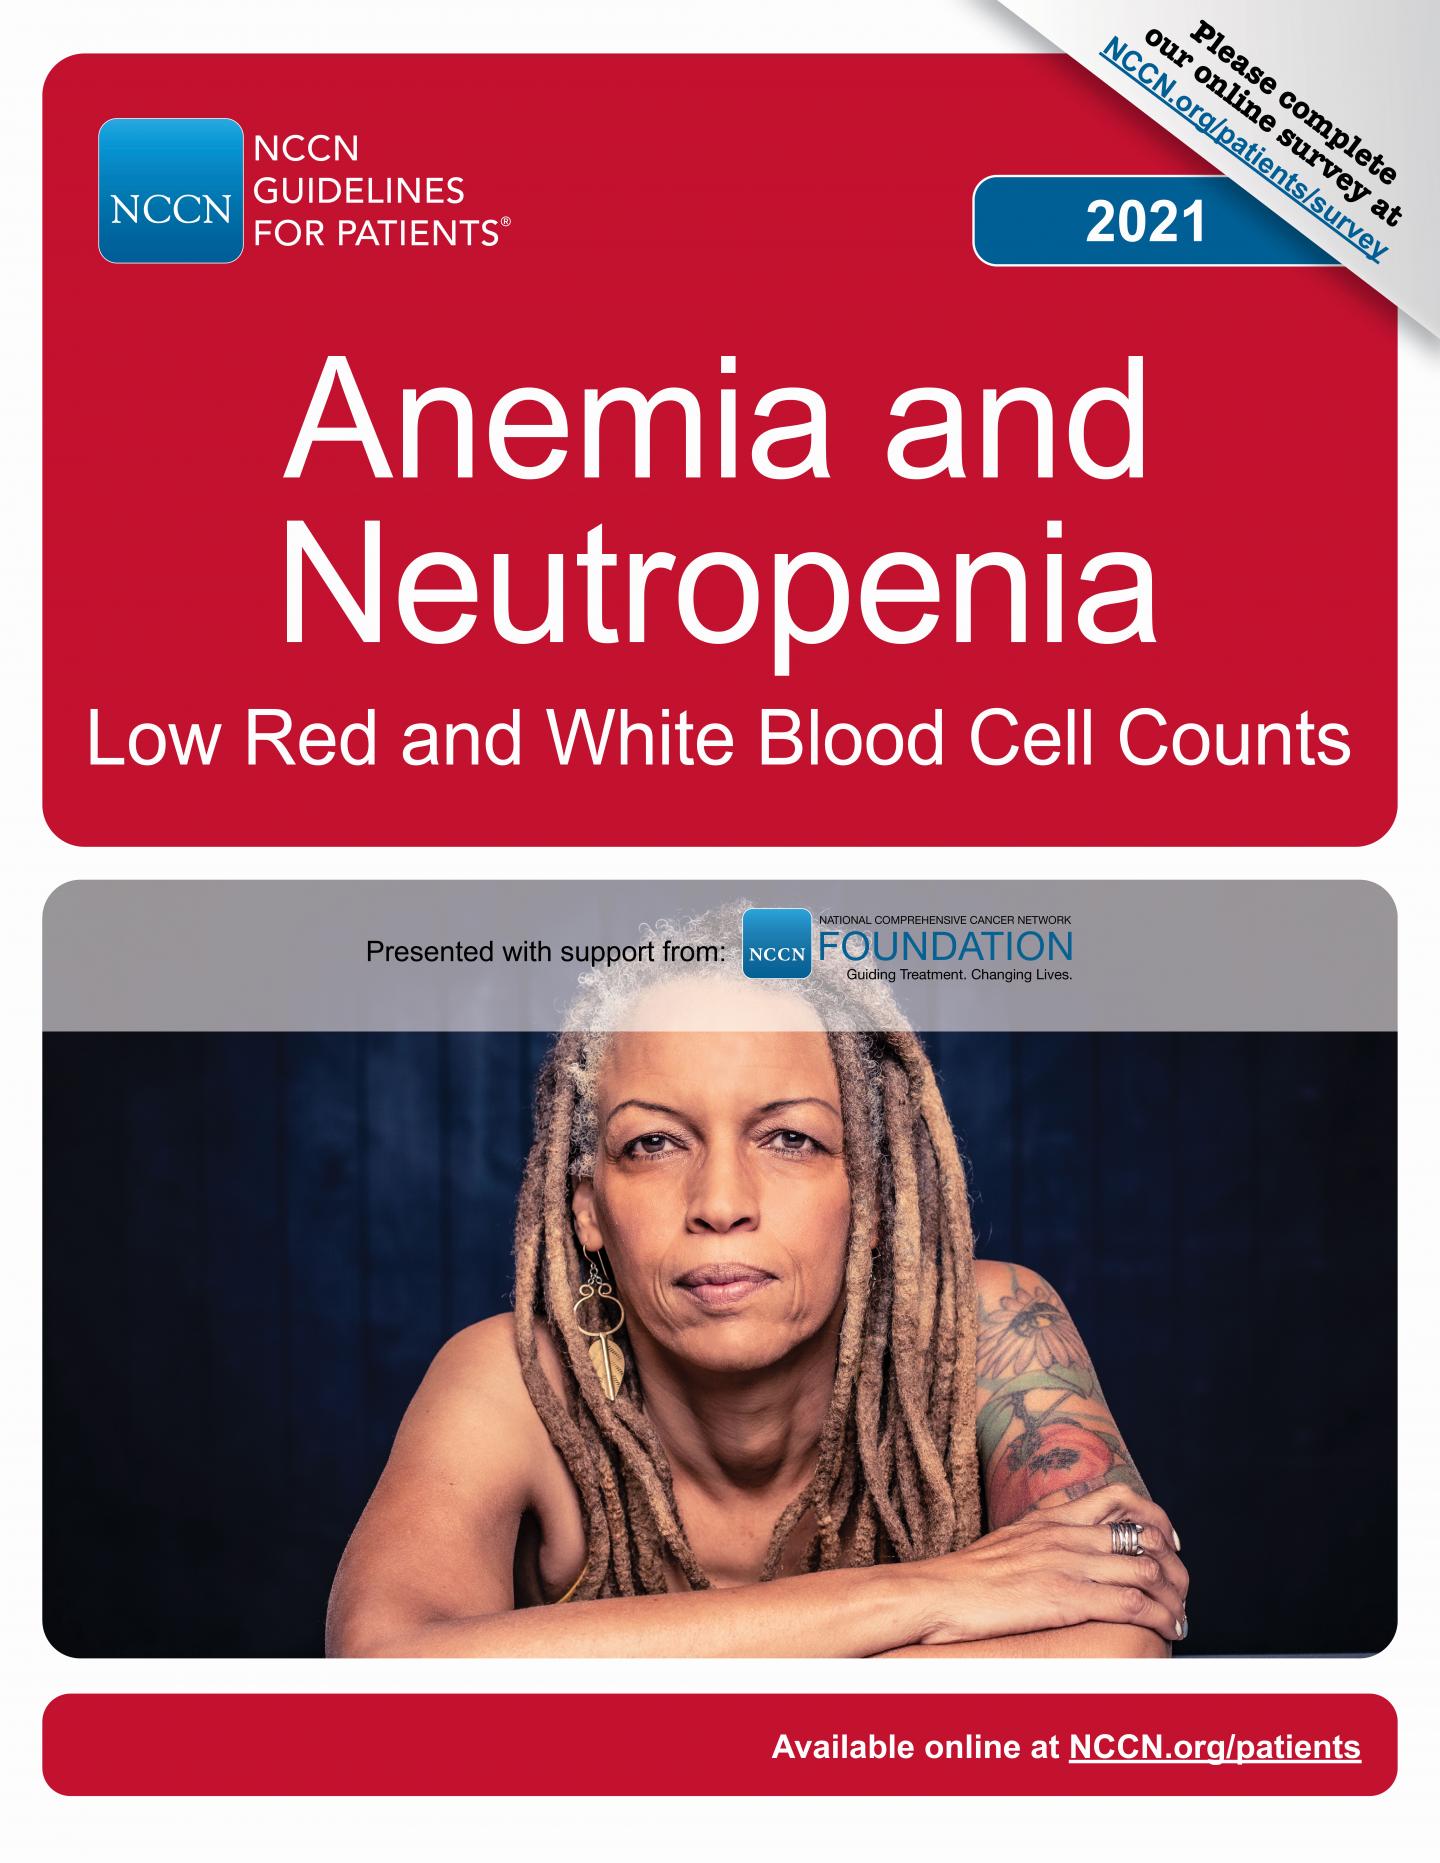 NCCN Guidelines for Patients®: Anemia and Neutropenia, Low Red and White Blood Cell Counts